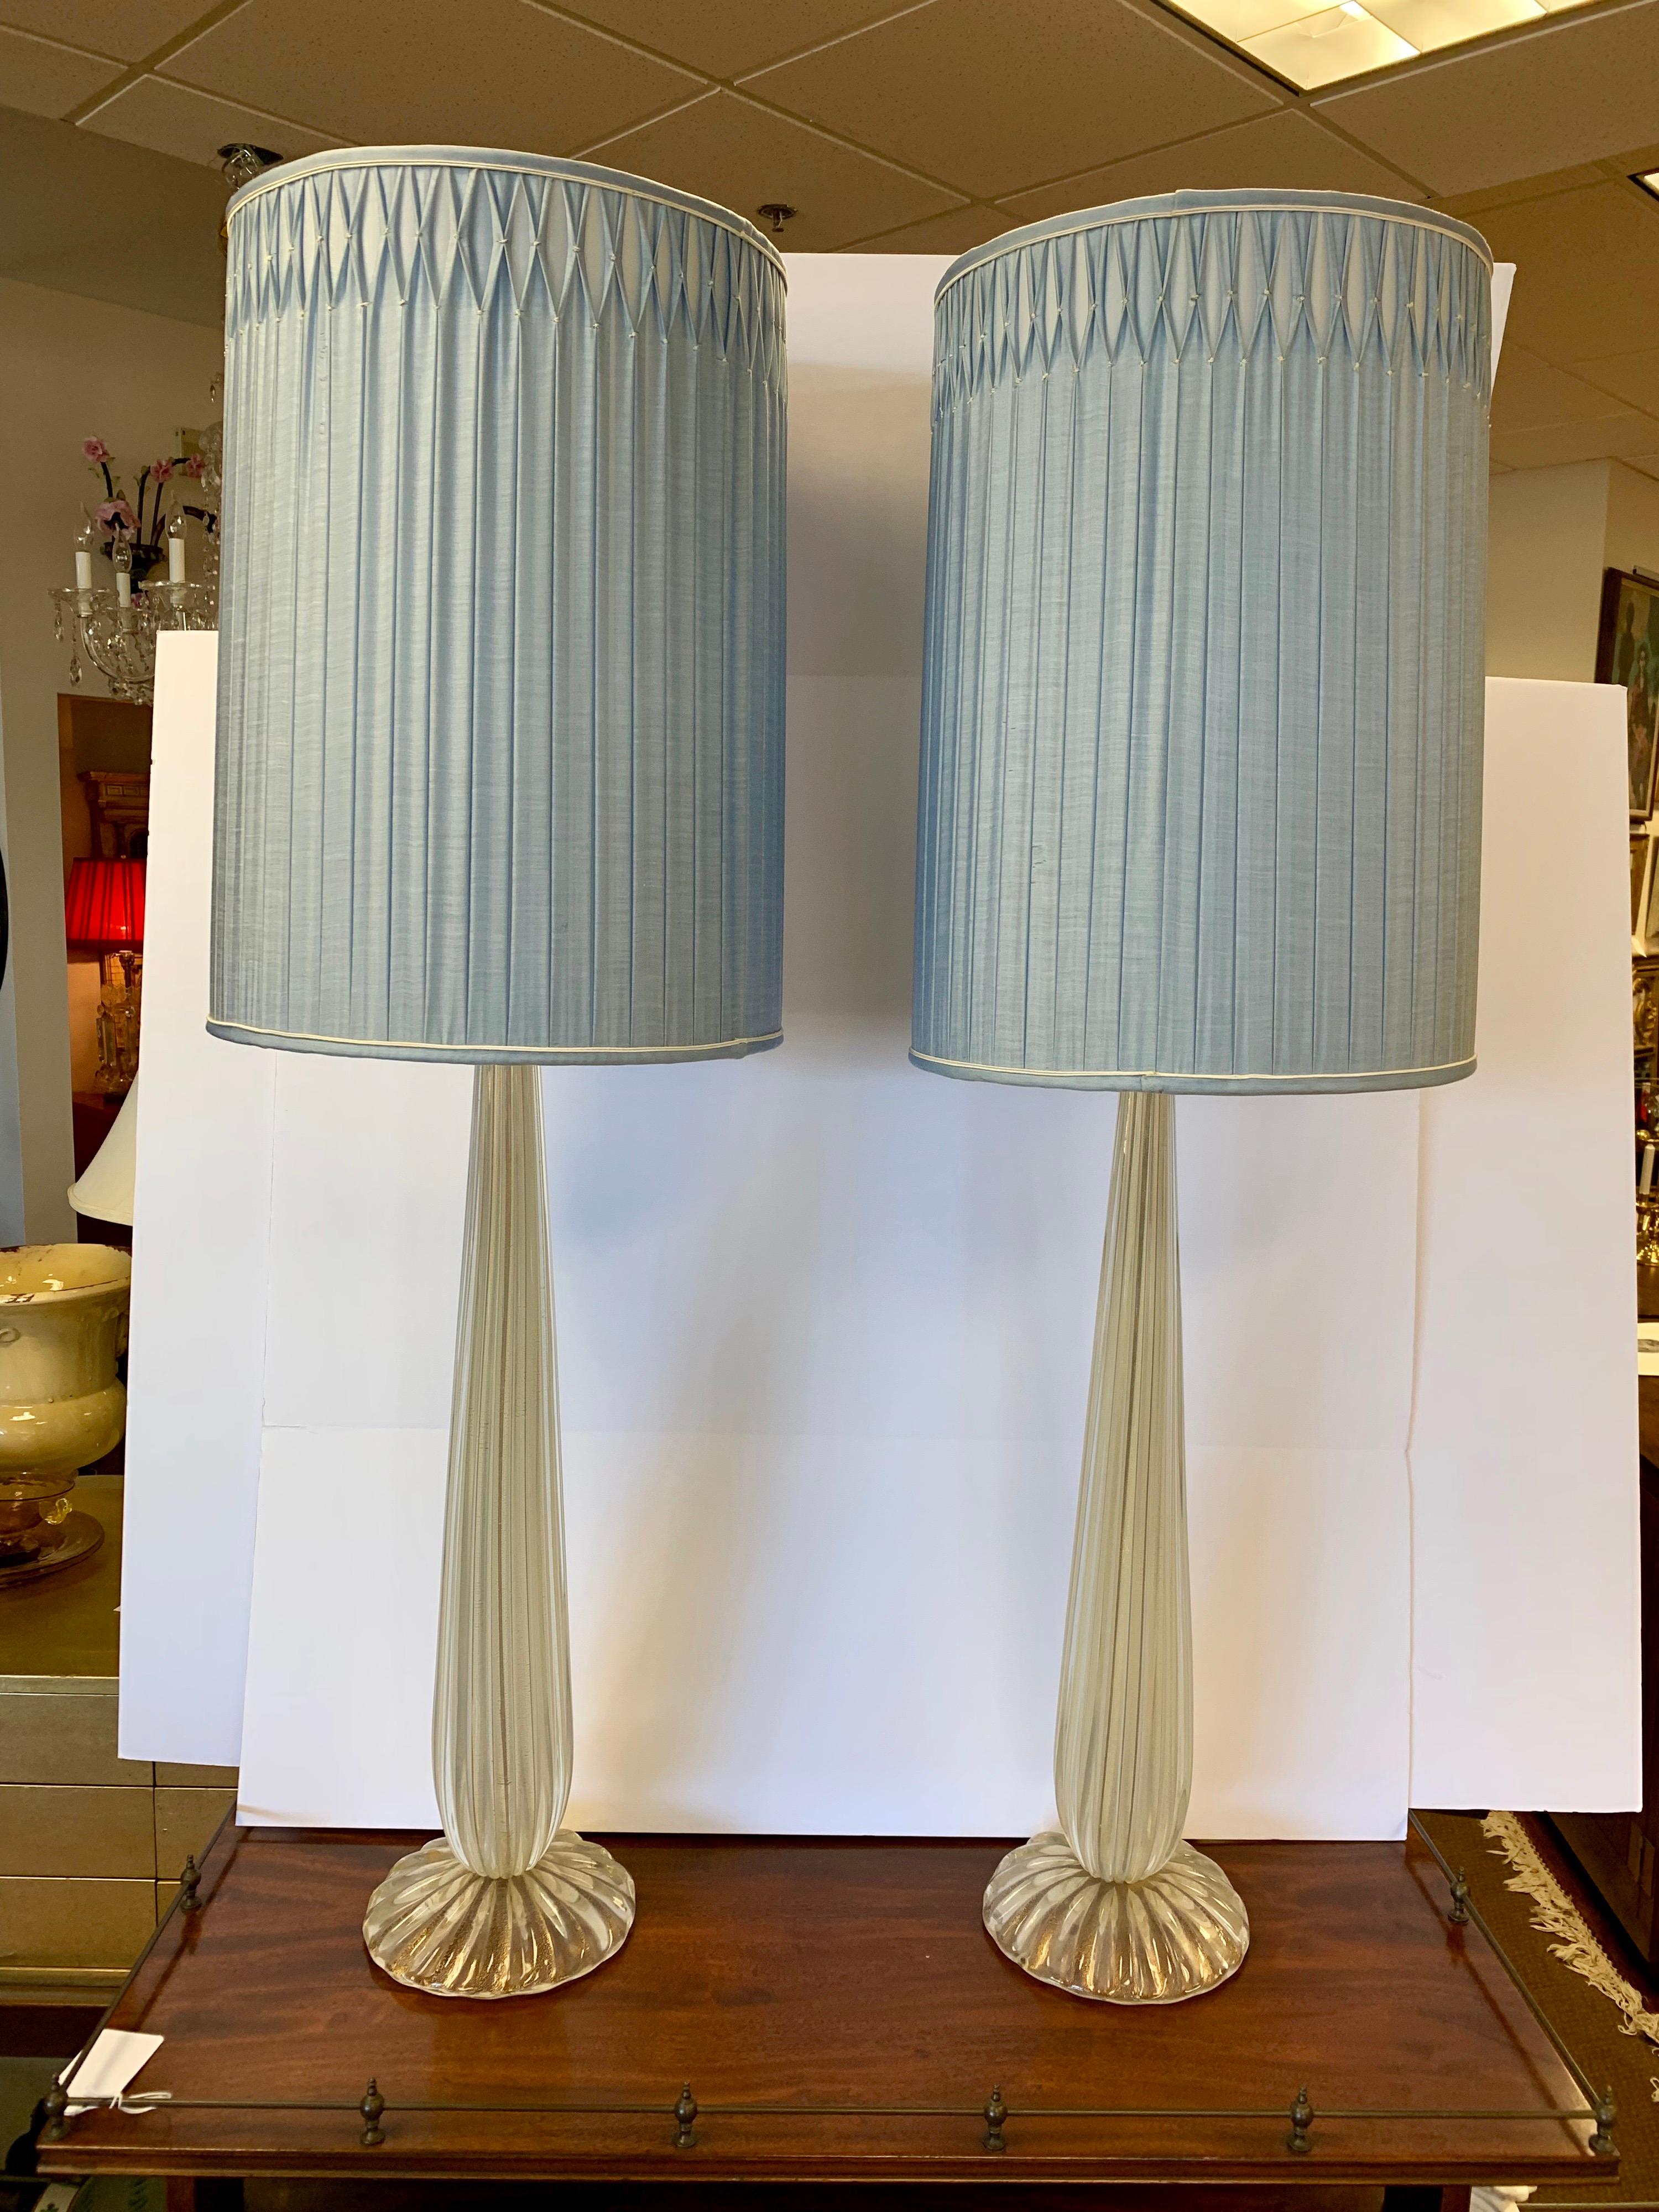 Stunning, very tall pair of signed Salviati Murano glass table lamps. Wired for USA and in working order.
Made of all Murano glass with gold specs. So sought after in this rare, tall size with original sky blue pleated shades which look like